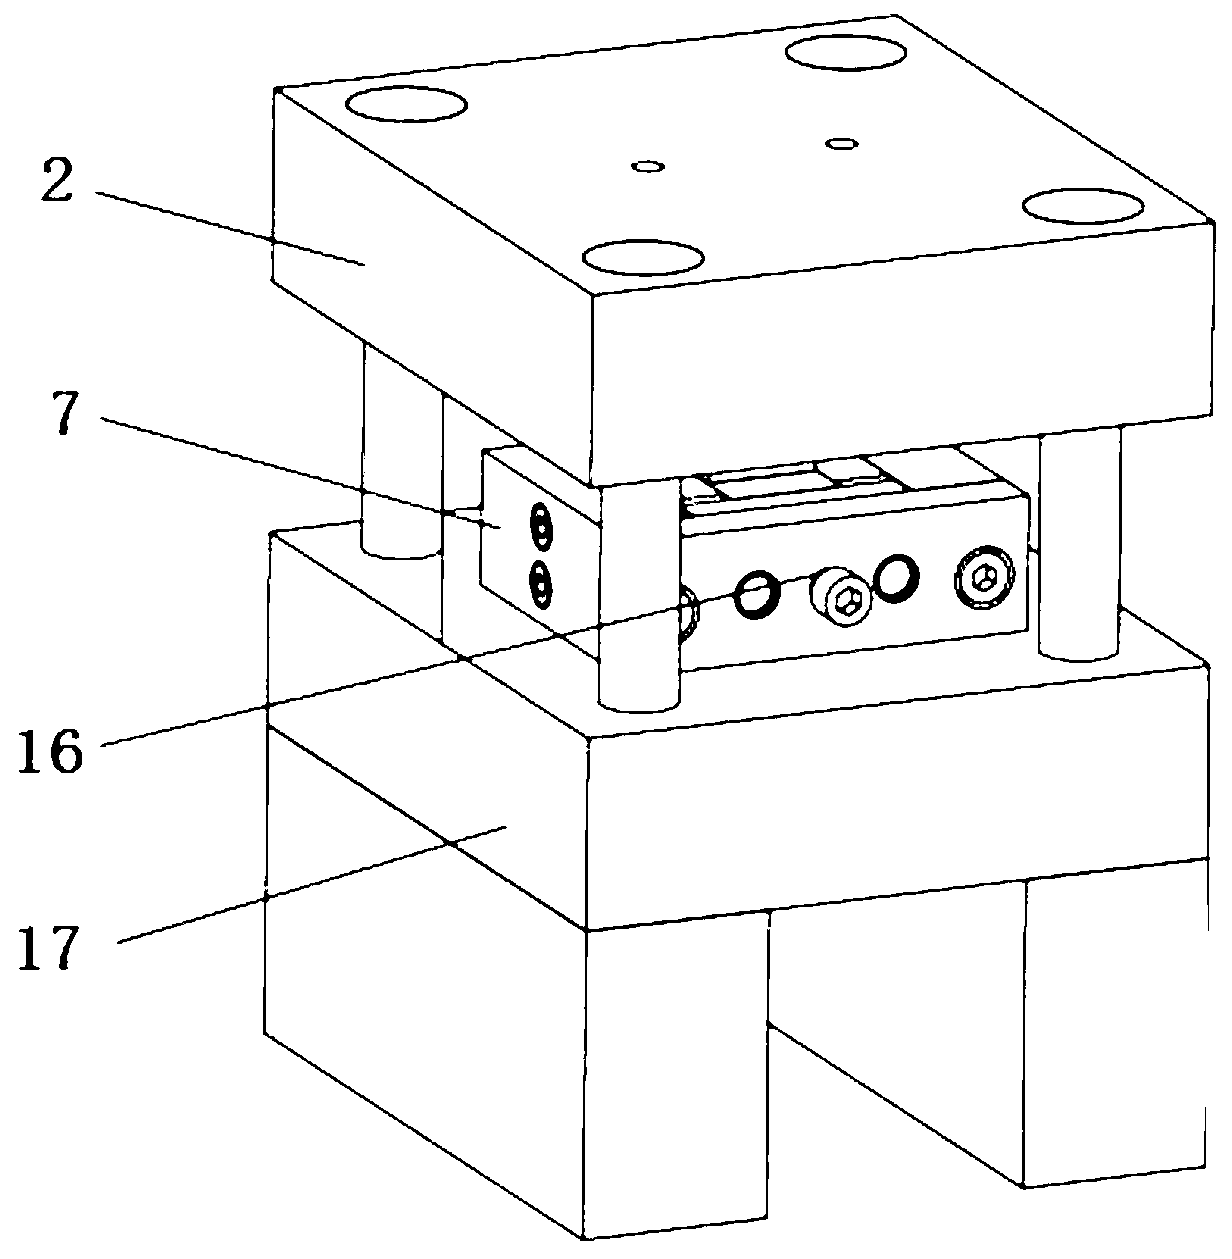 Step-loading plate compression, shearing and testing device